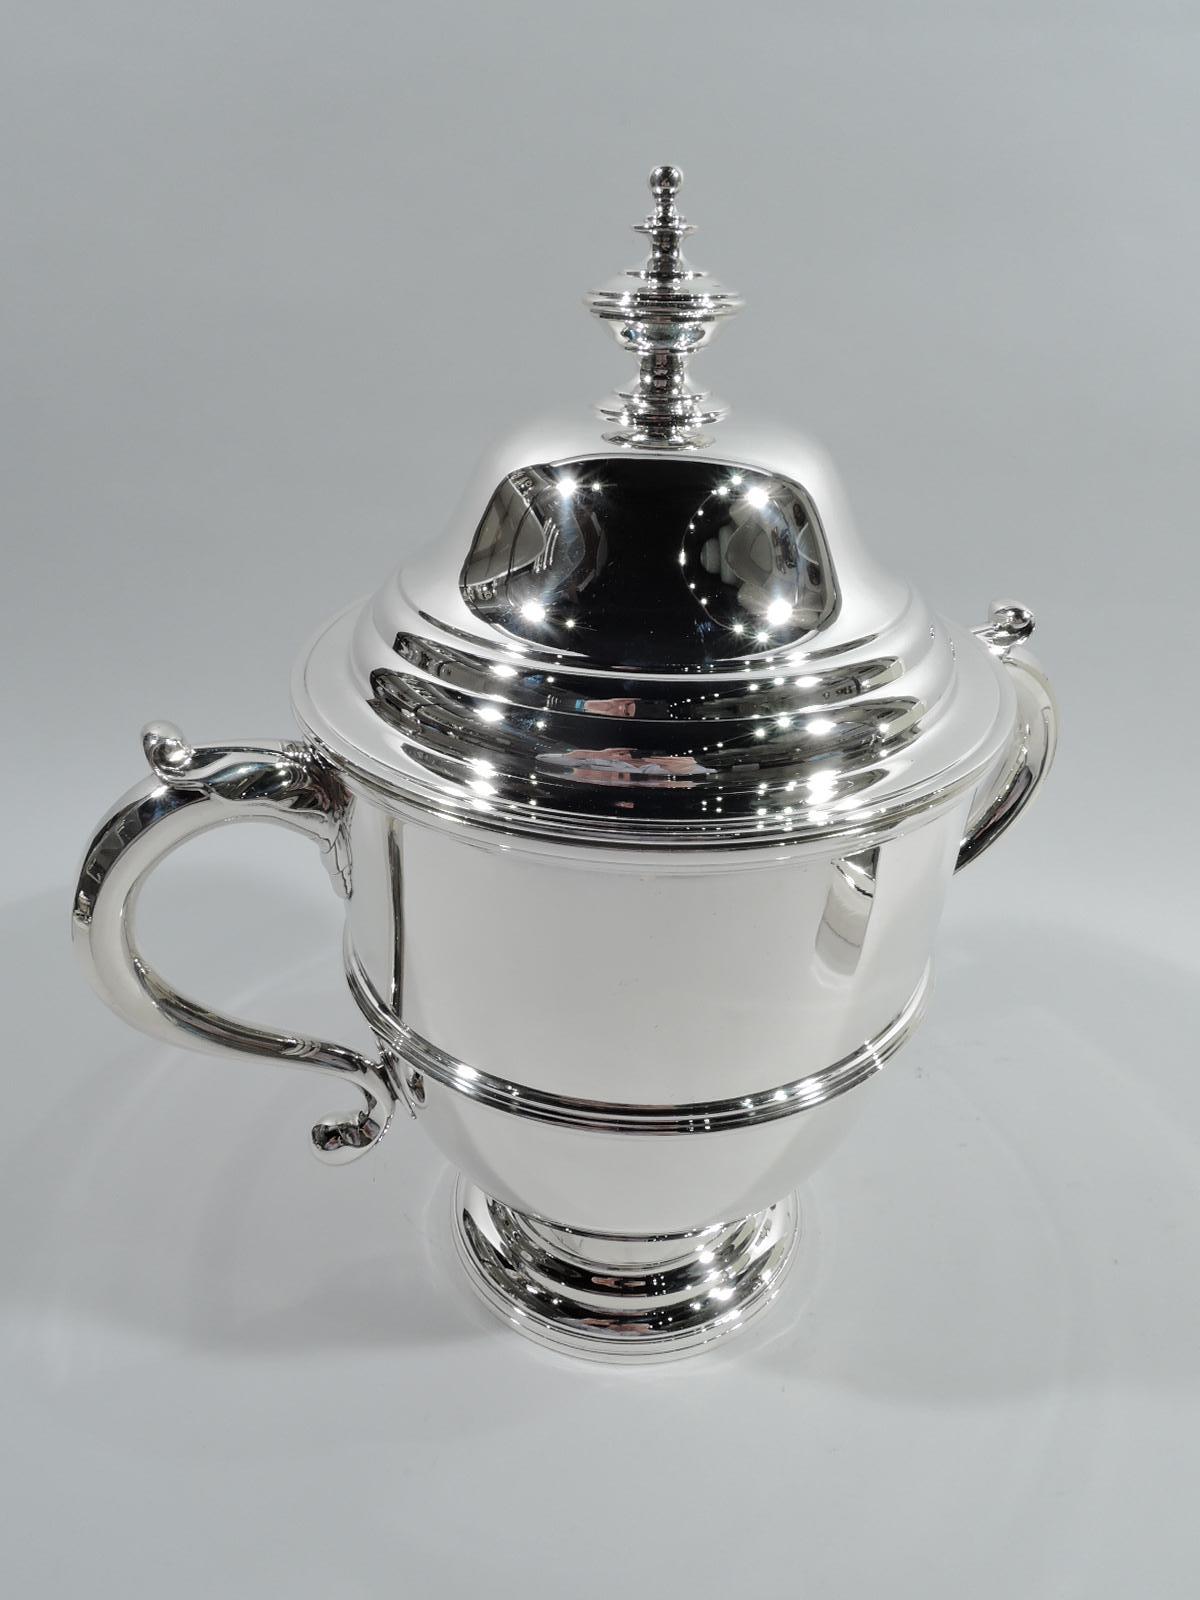 Classical sterling silver covered urn. Made by Currier & Roby in New York, ca 1920. Girdled bowl with leaf-capped s-scroll side handles, stepped foot and stepped and domed cover with vasiform finial. Traditional form with extra oomph. Beautiful